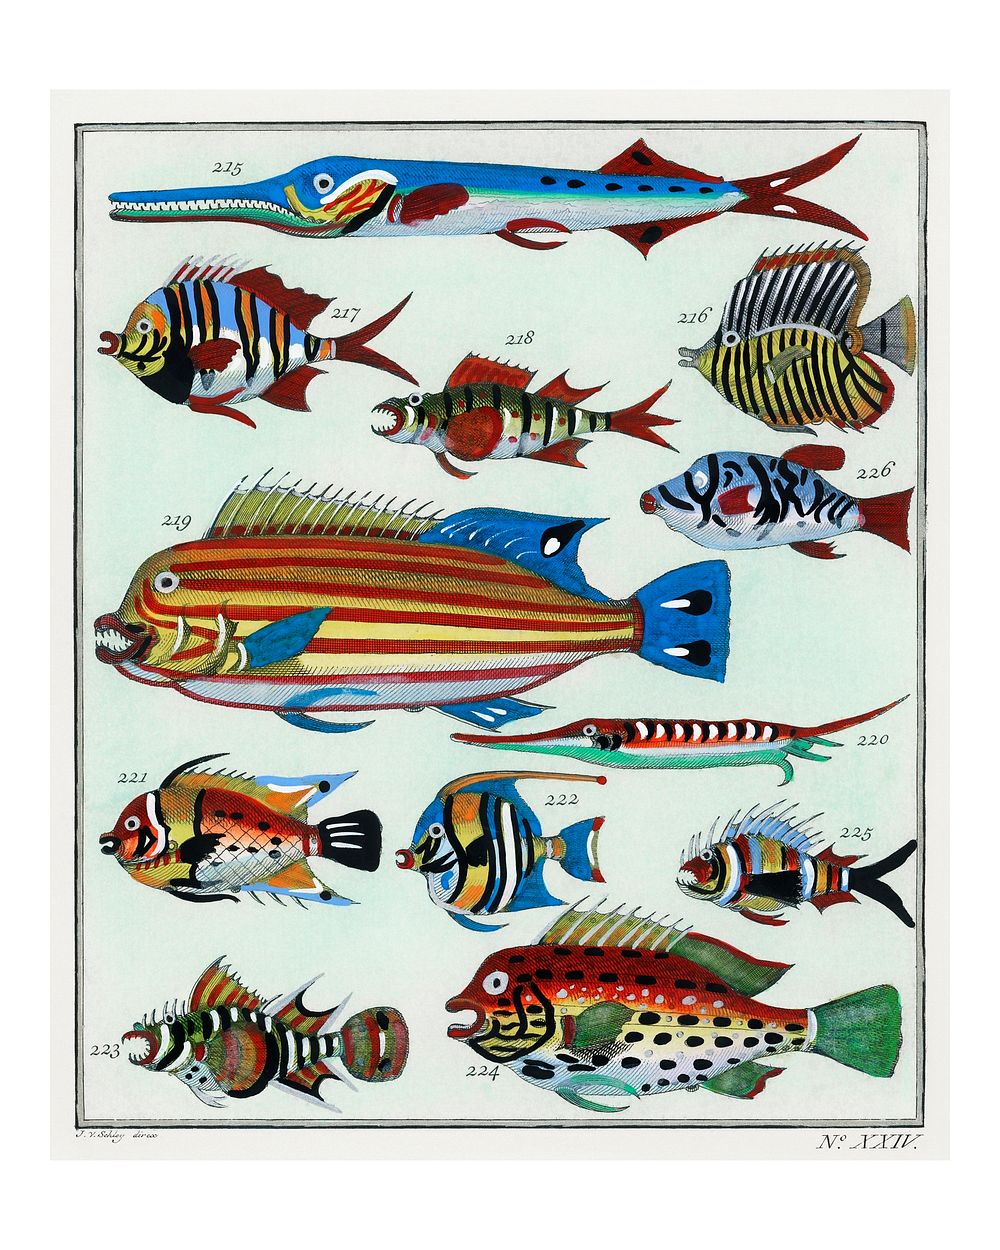 Collage of colorful rare exotic fish vintage illustration wall art print and poster design remix from original artwork.